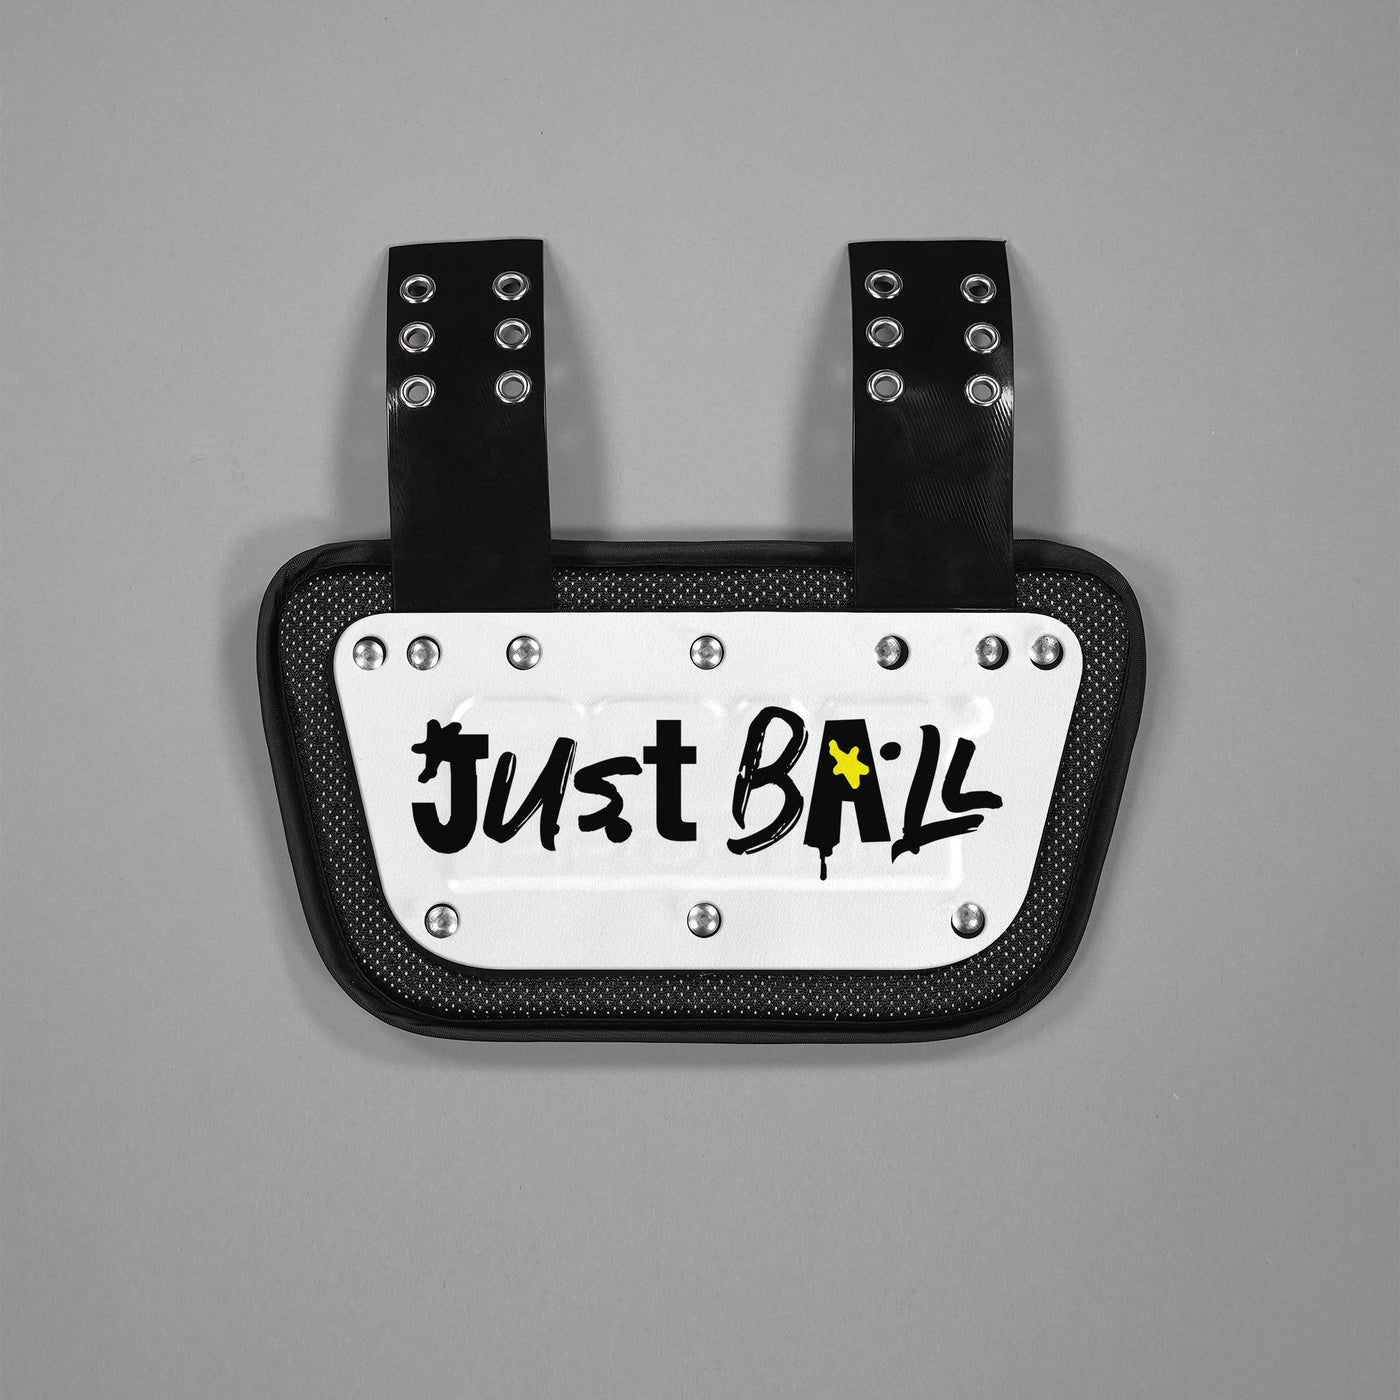 Just Ball Sticker for Back Plate